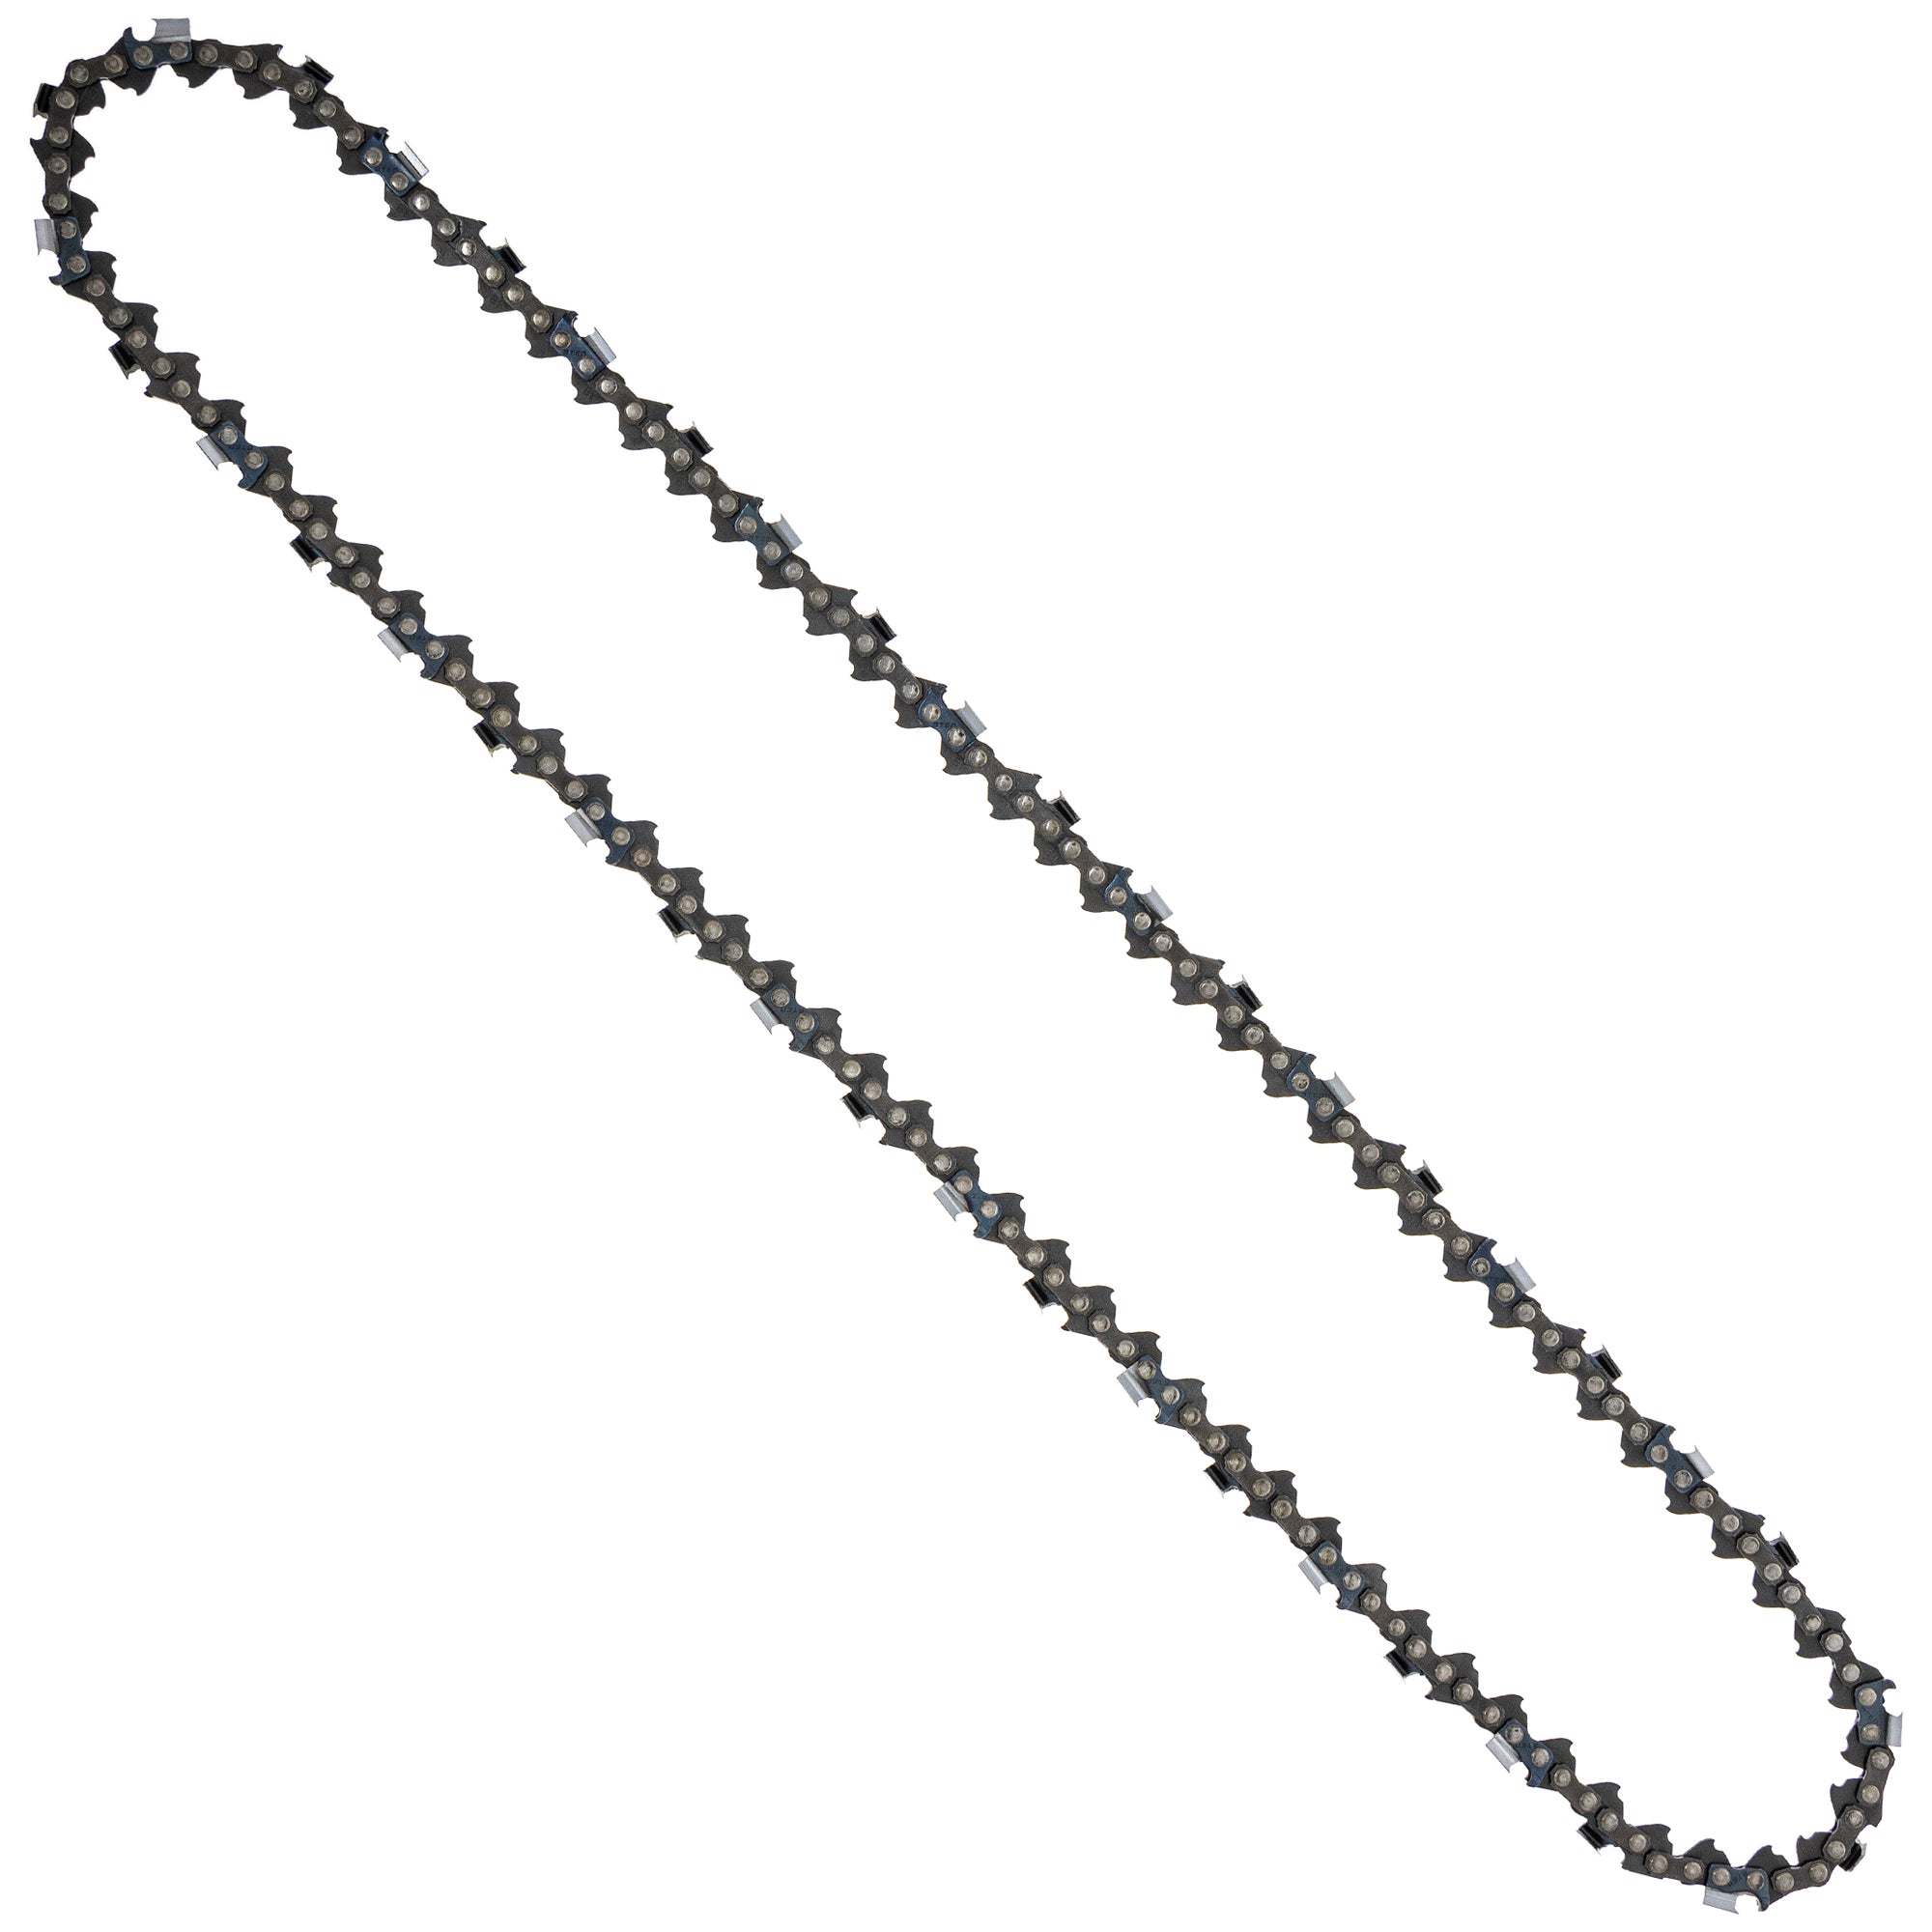 8TEN 810-CCC2310H Chain 5-Pack for zOTHER Oregon MS 634 30 040